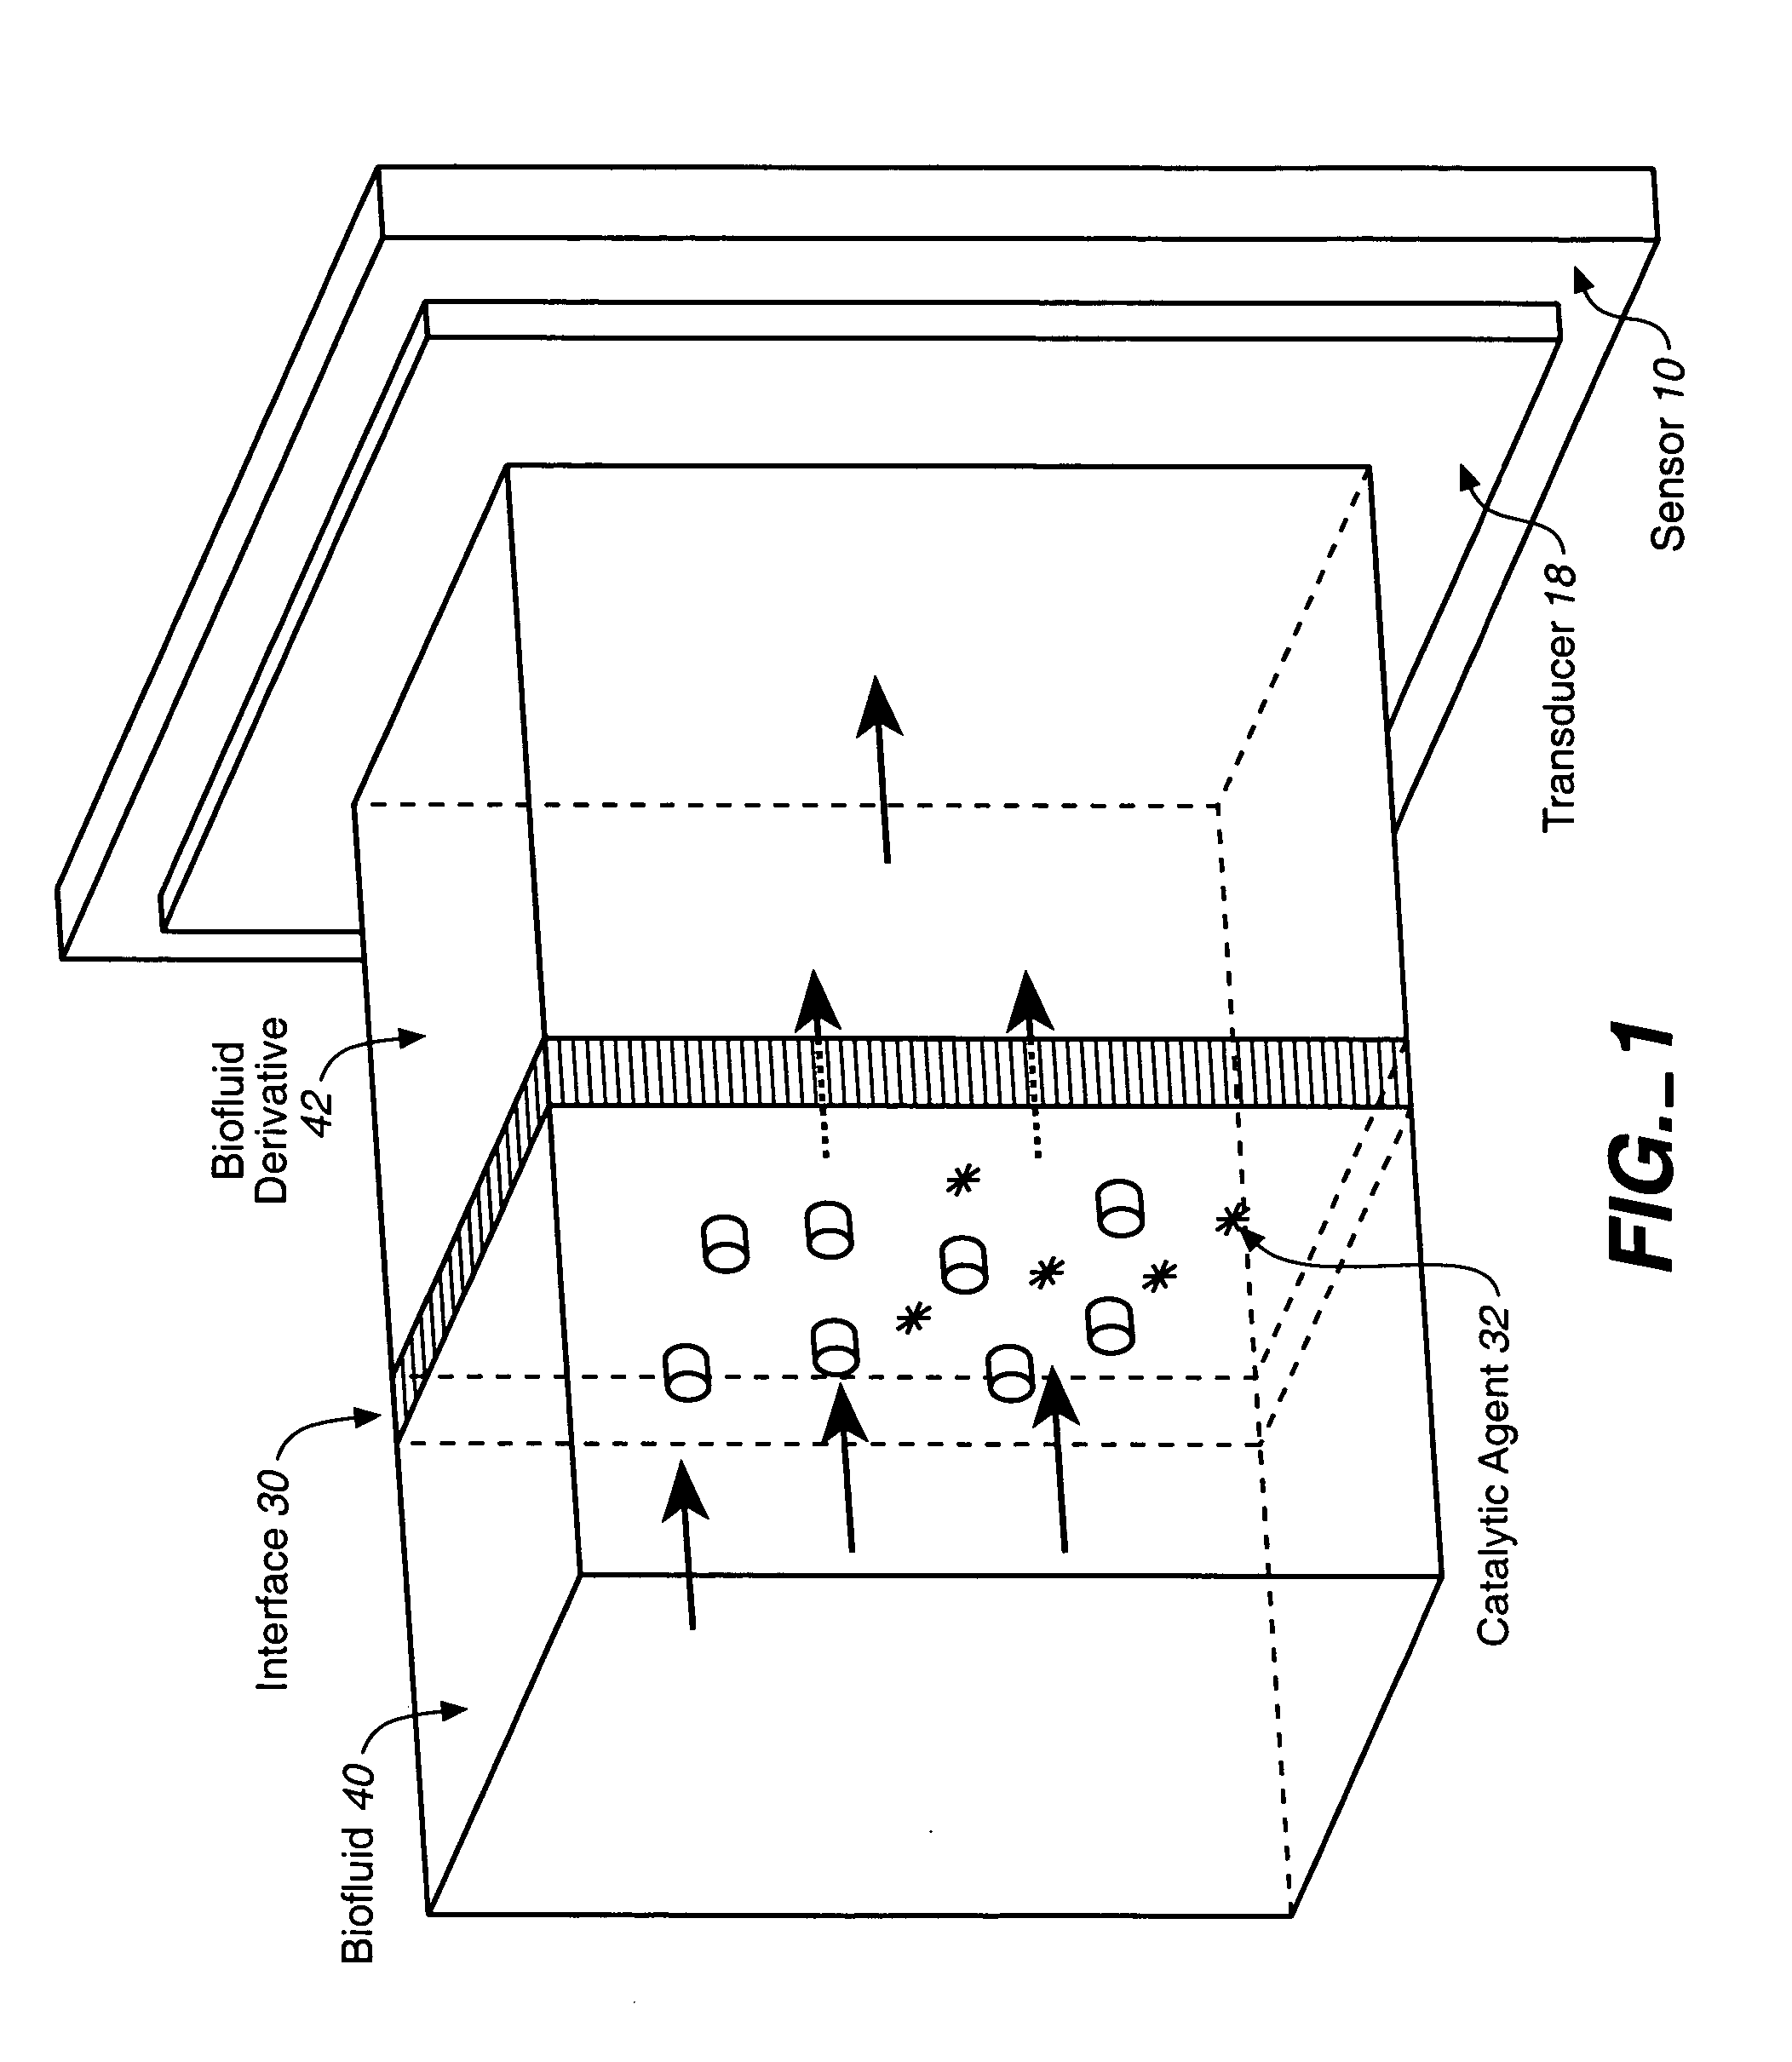 Analyte sensor, and associated system and method employing a catalytic agent